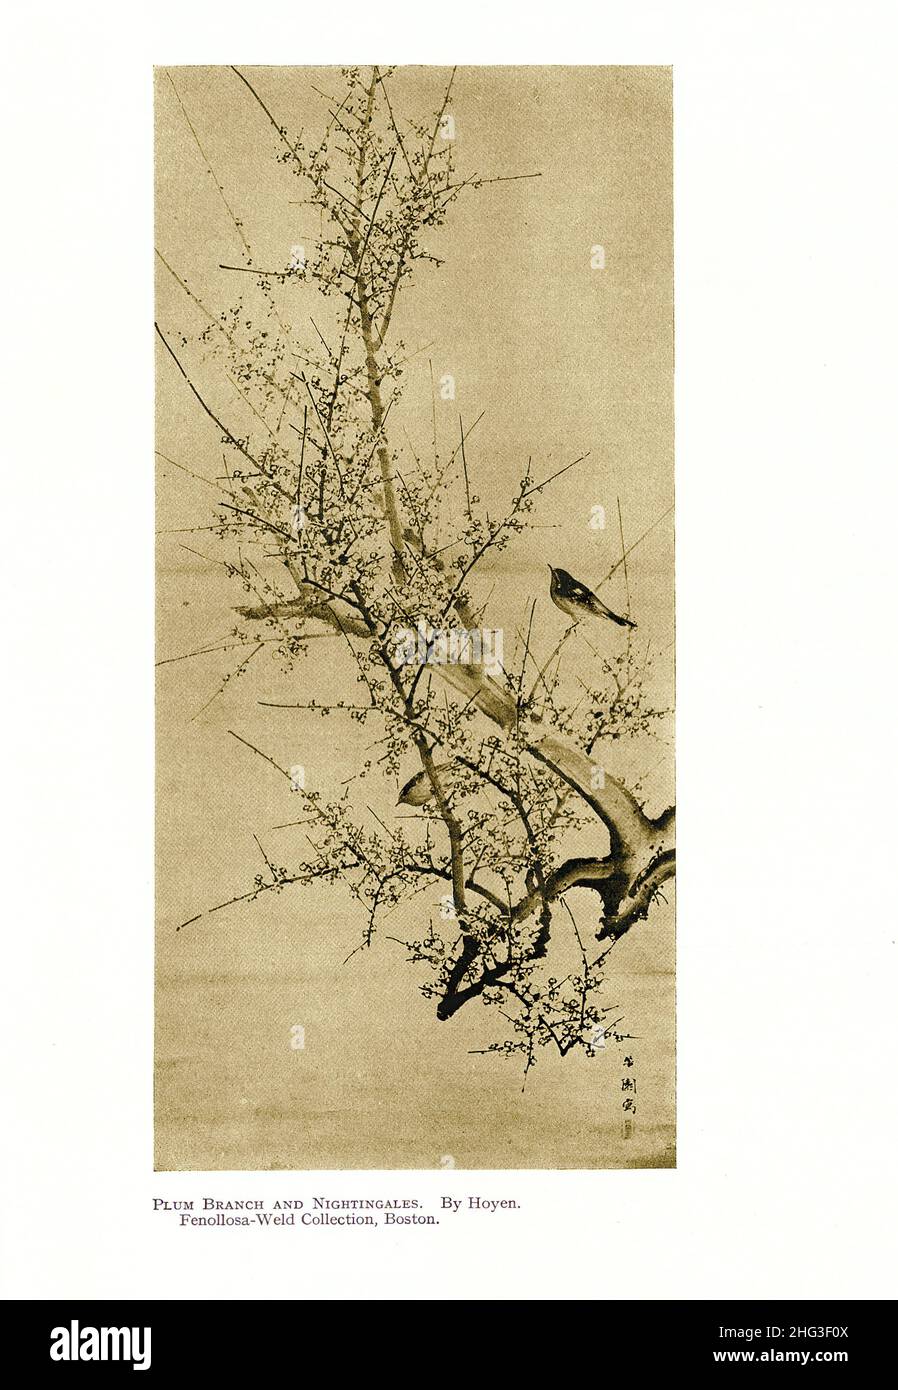 19th century Japanese painting: Plum Branch and Nightingales. By Hoyen. Reproduction of book illustration of 1912 Stock Photo